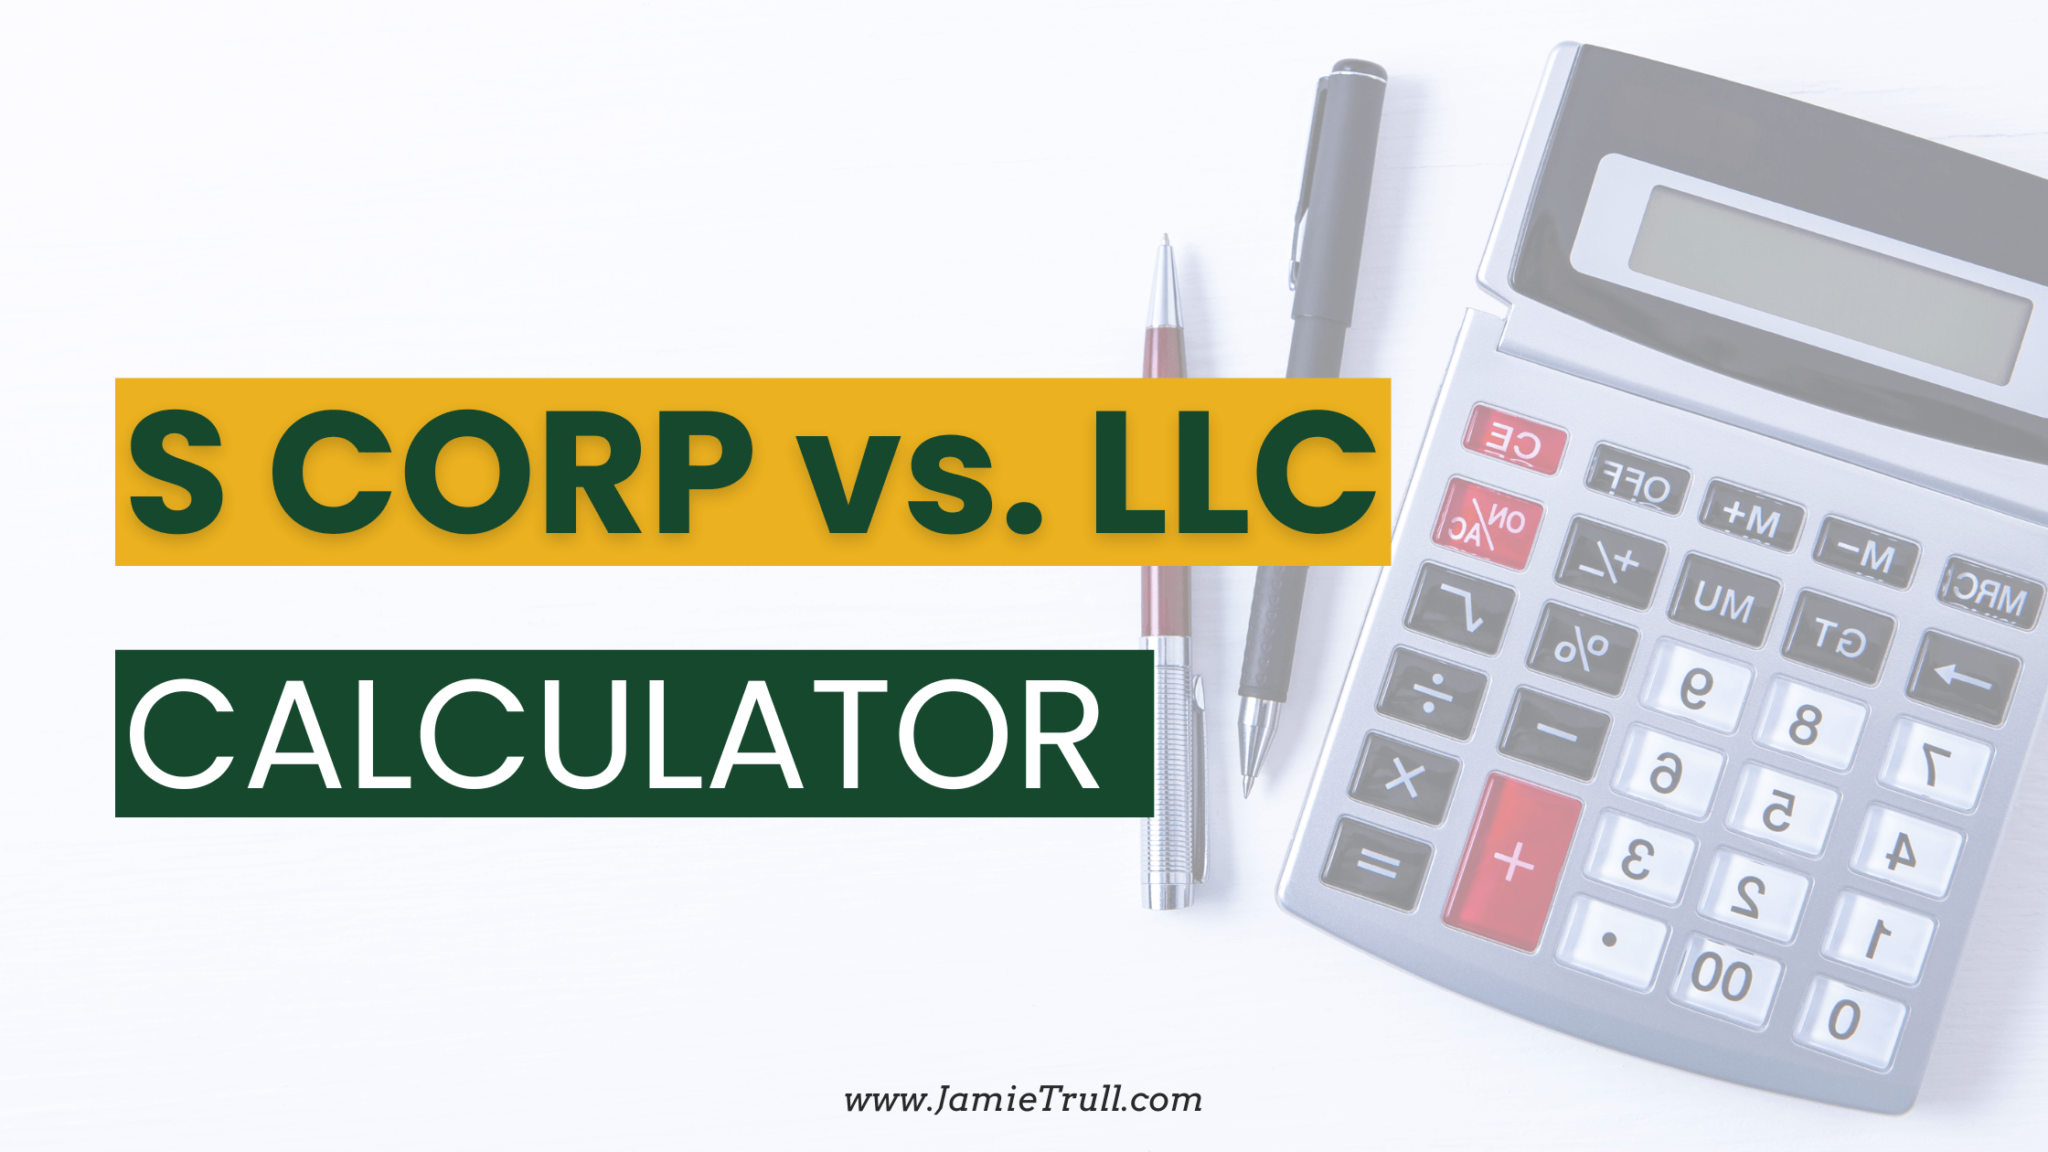 Most S Corp Tax Calculator Methods Are Wrong (Do This Instead!)